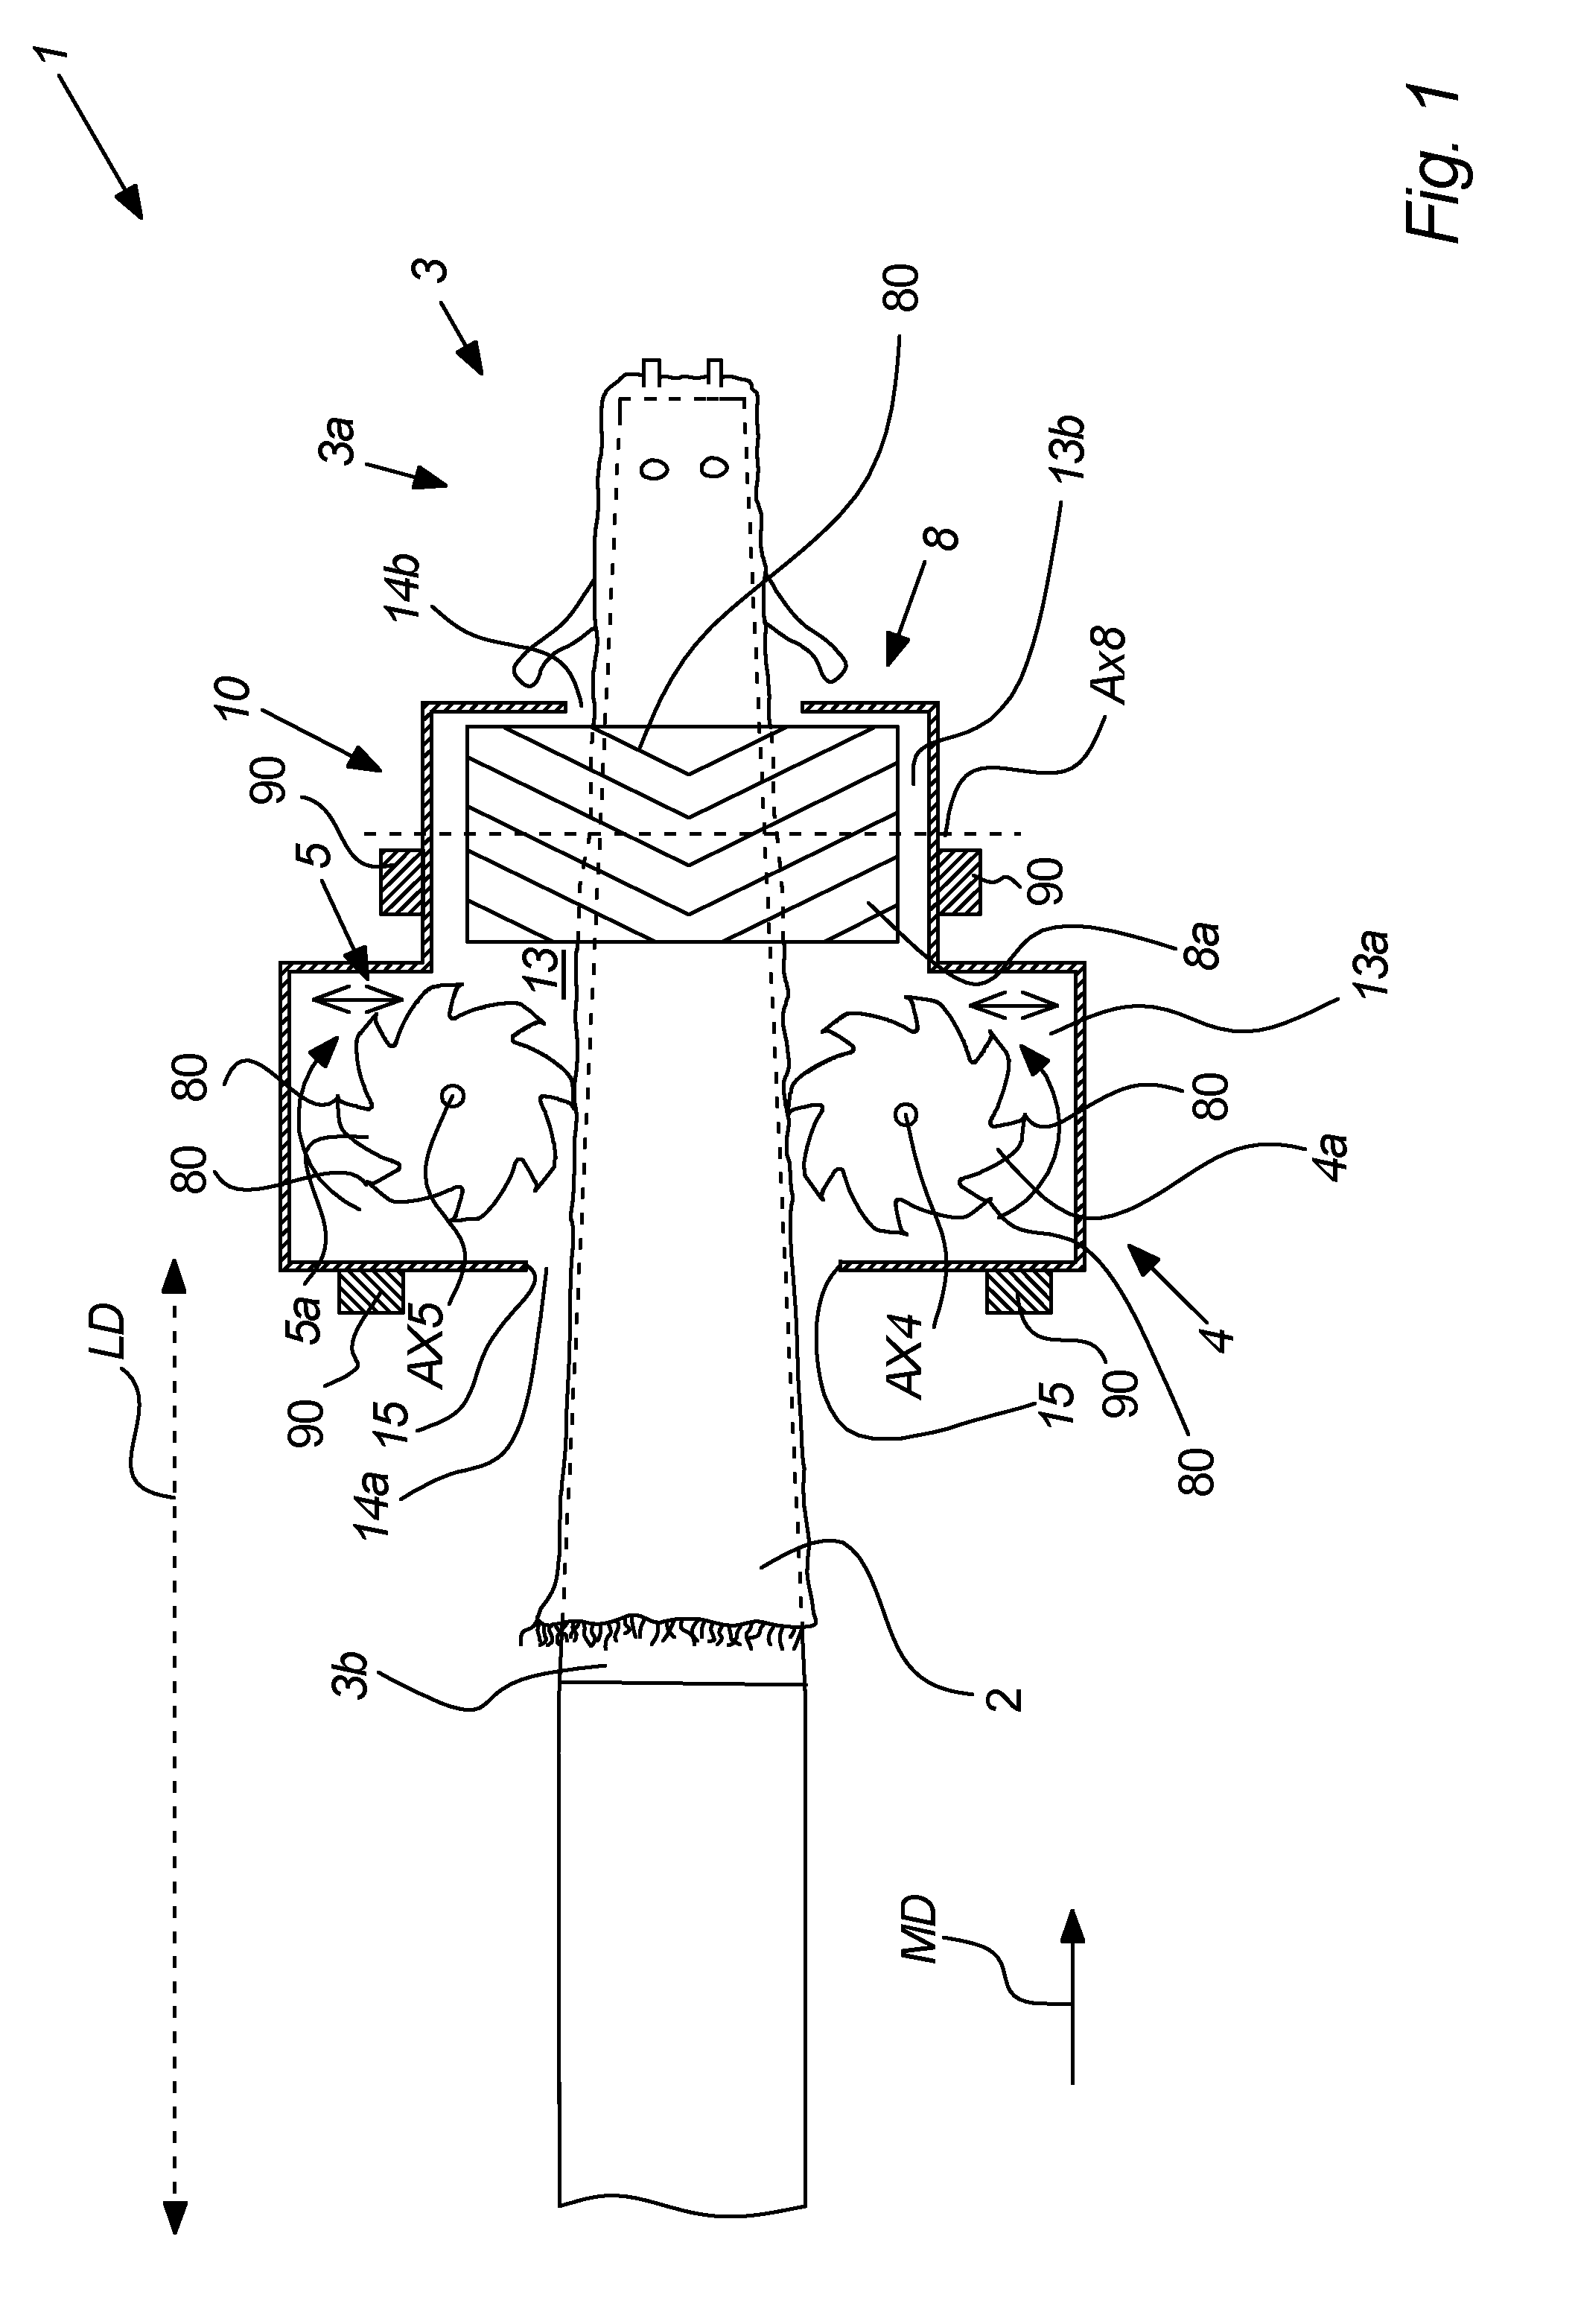 Cover arrangement for an apparatus for processing fur